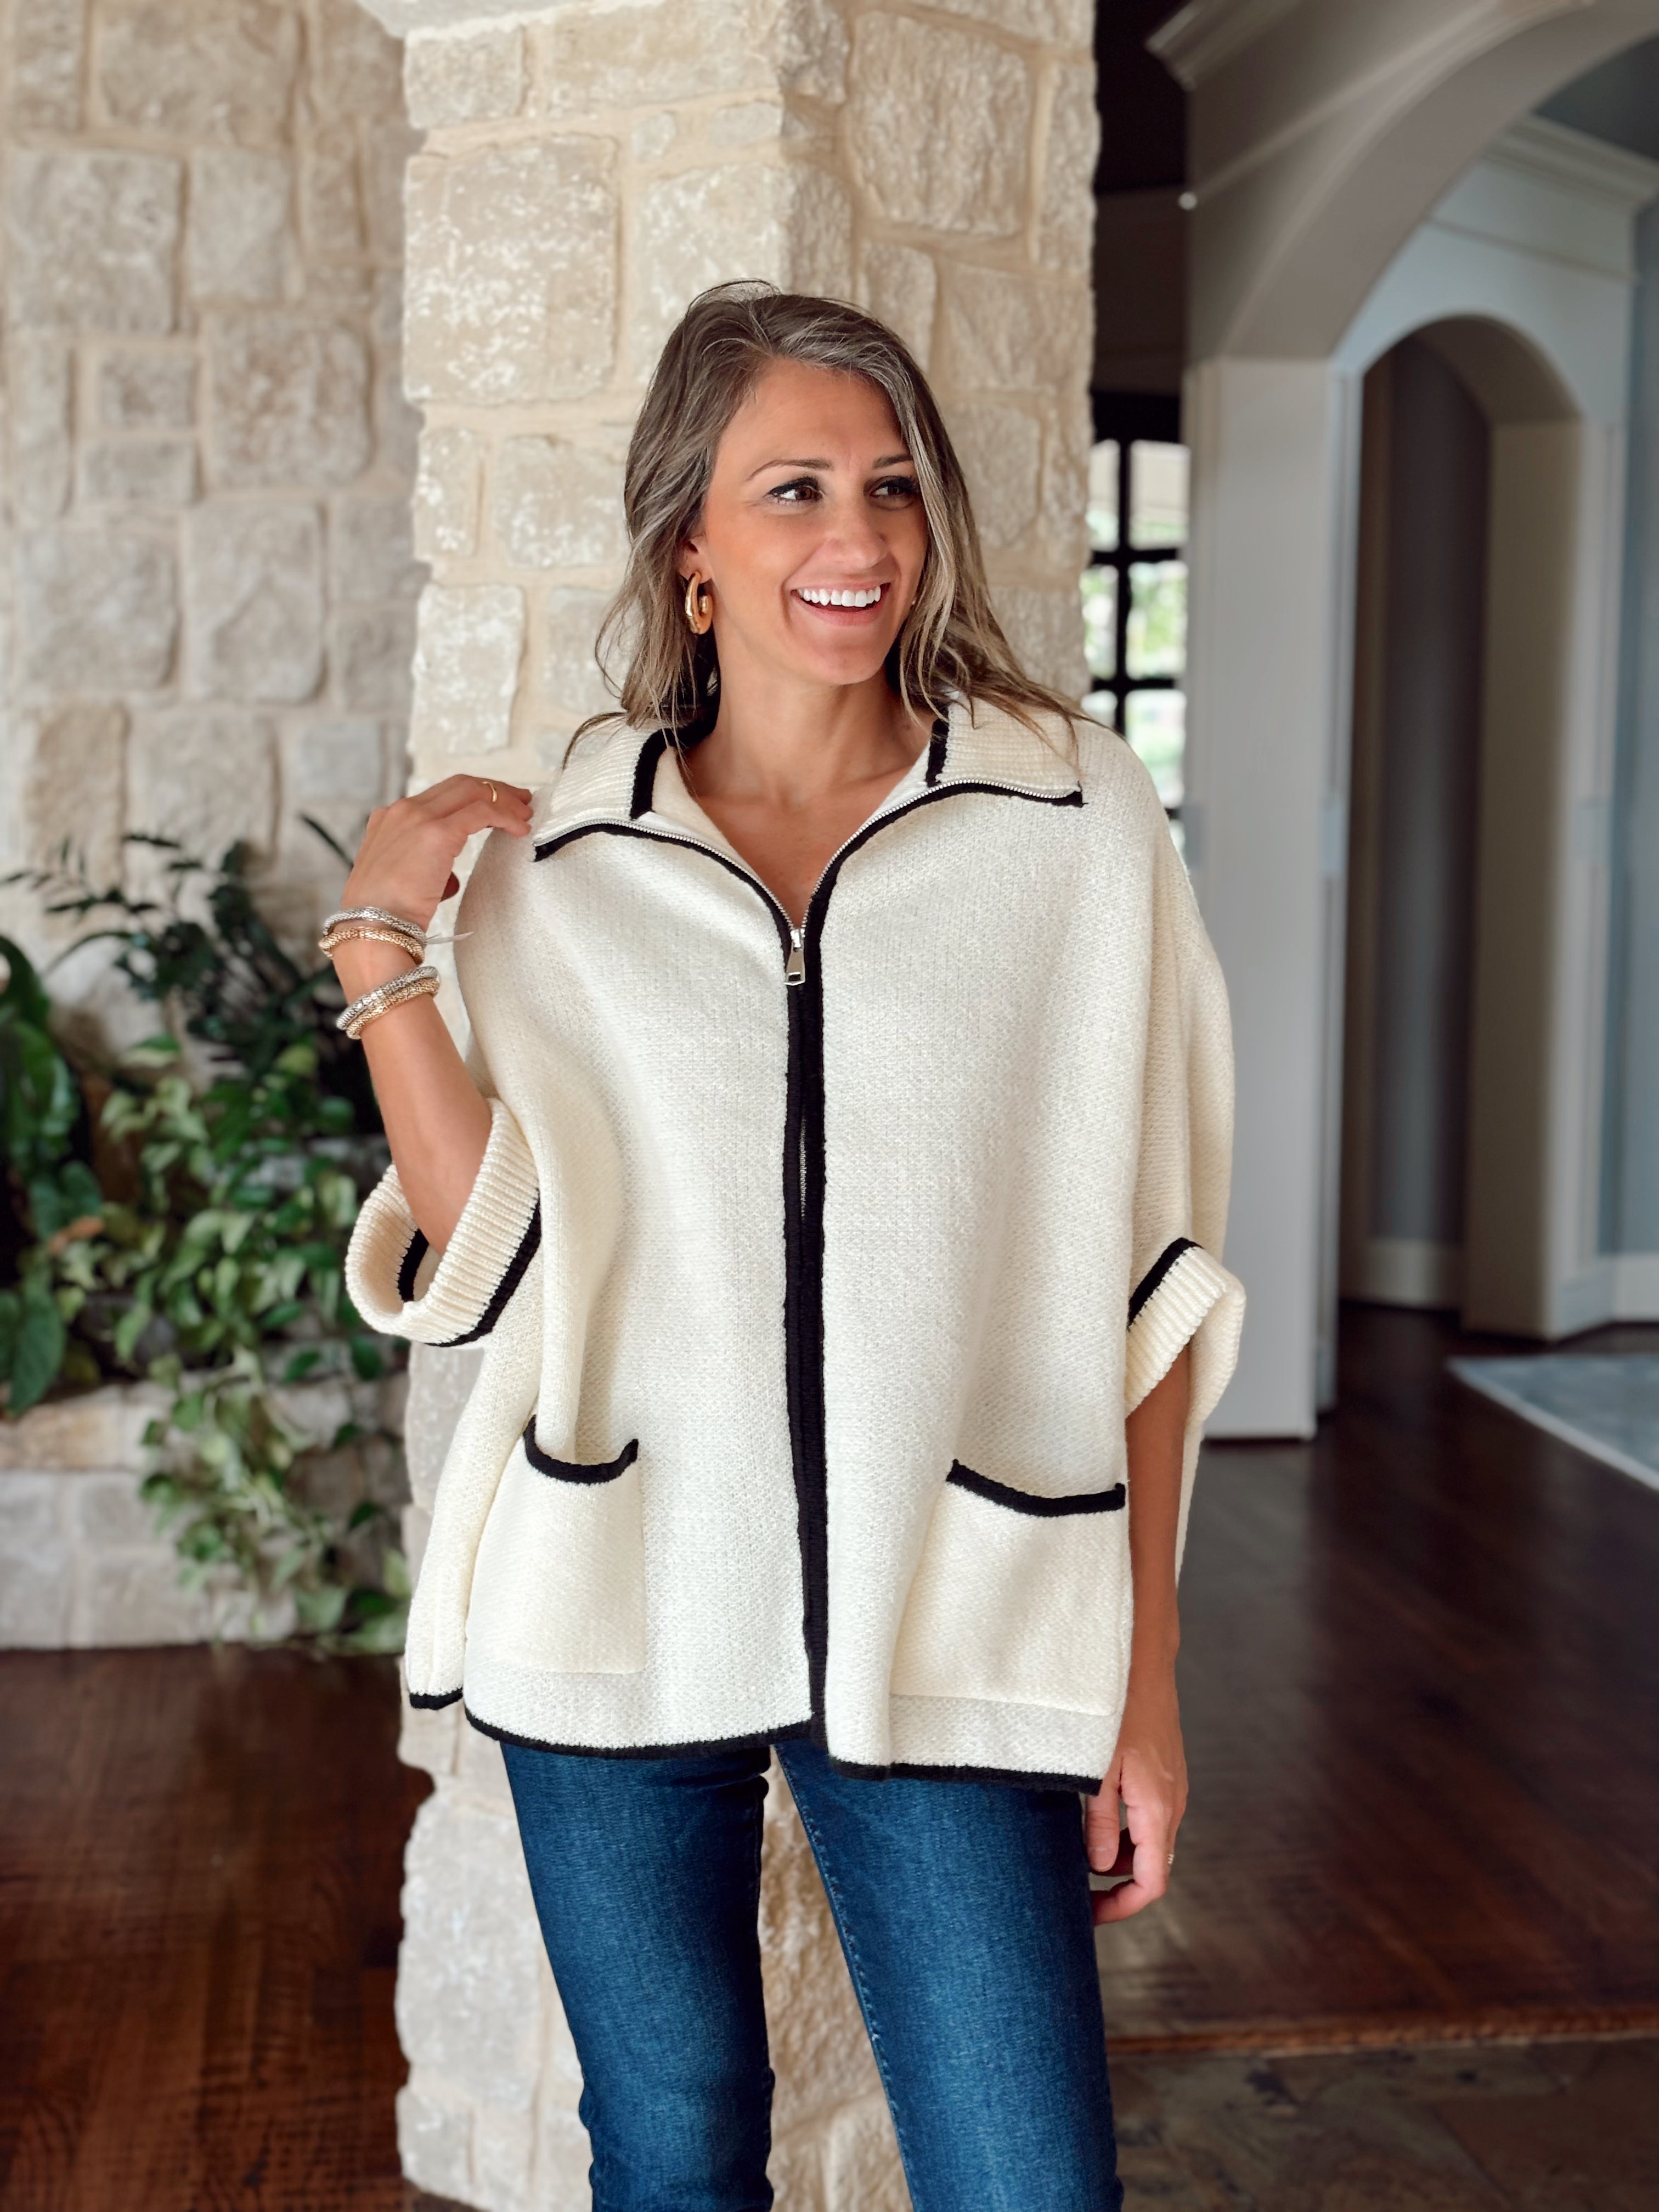 Give It A Rest Cardigan, dolman sleeve white knit zip-up cardigan with black hemming